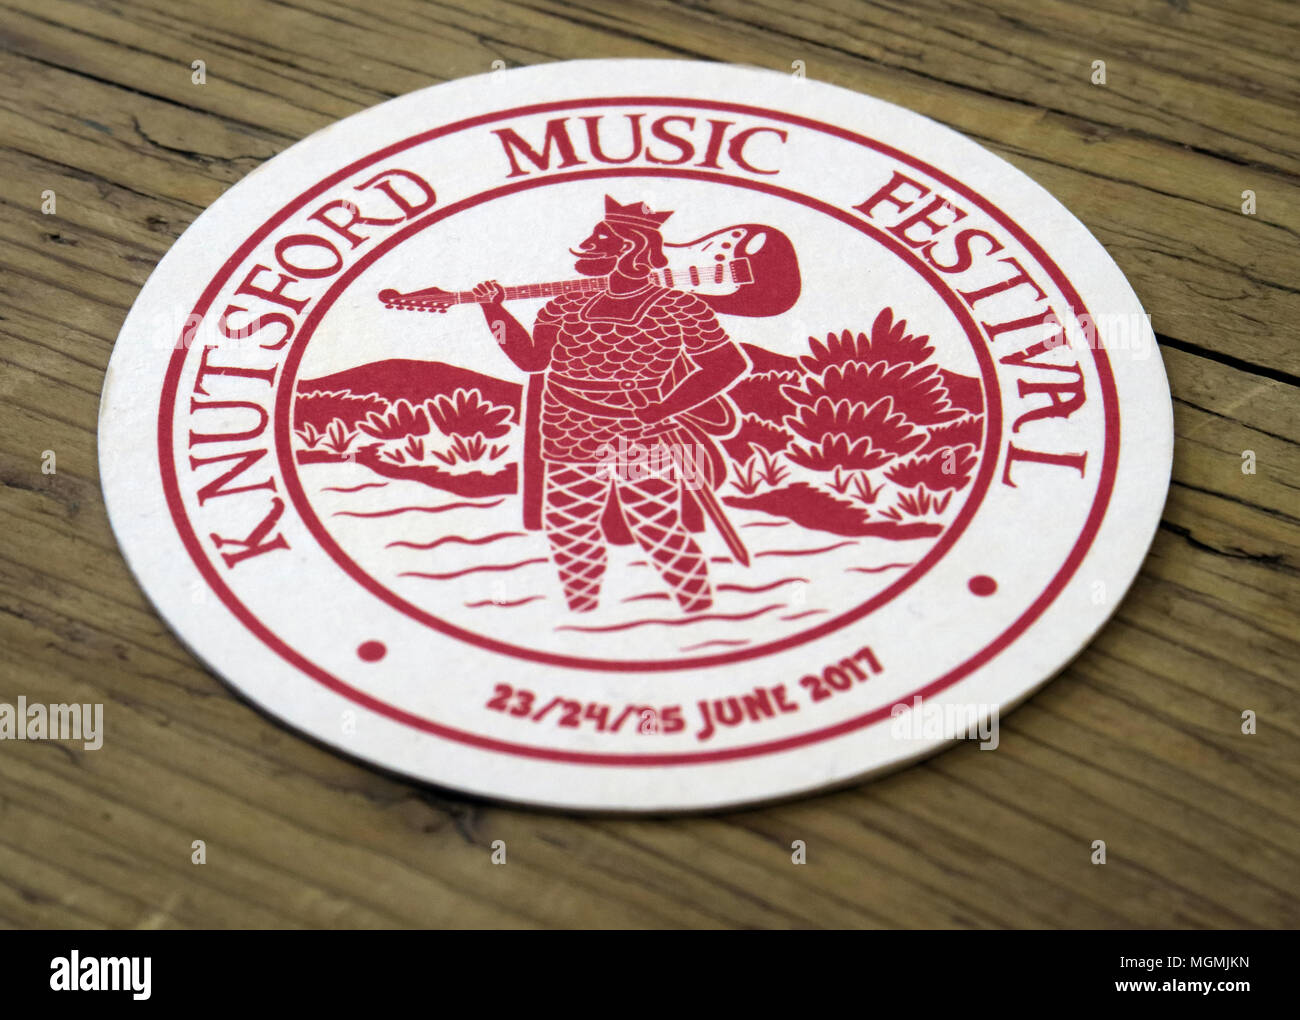 Knutsford Music Festival beermat, Cheshire, GO Banque D'Images